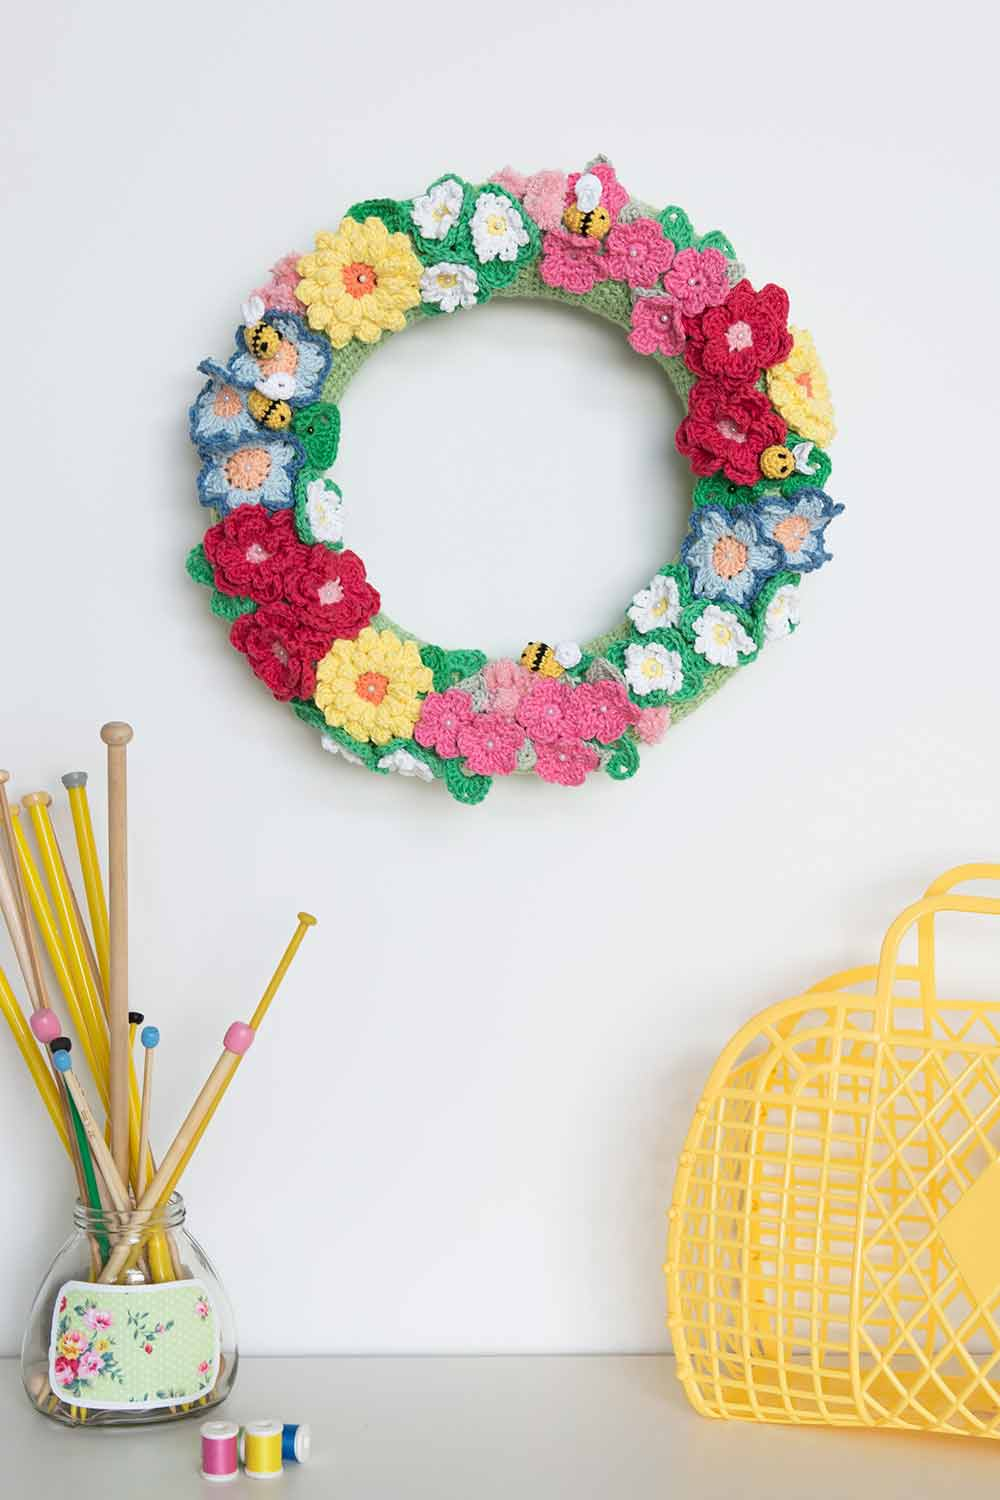 Crochet Thread Patterns 40 Crochet Flower Patterns And What To Do With Them Mollie Makes